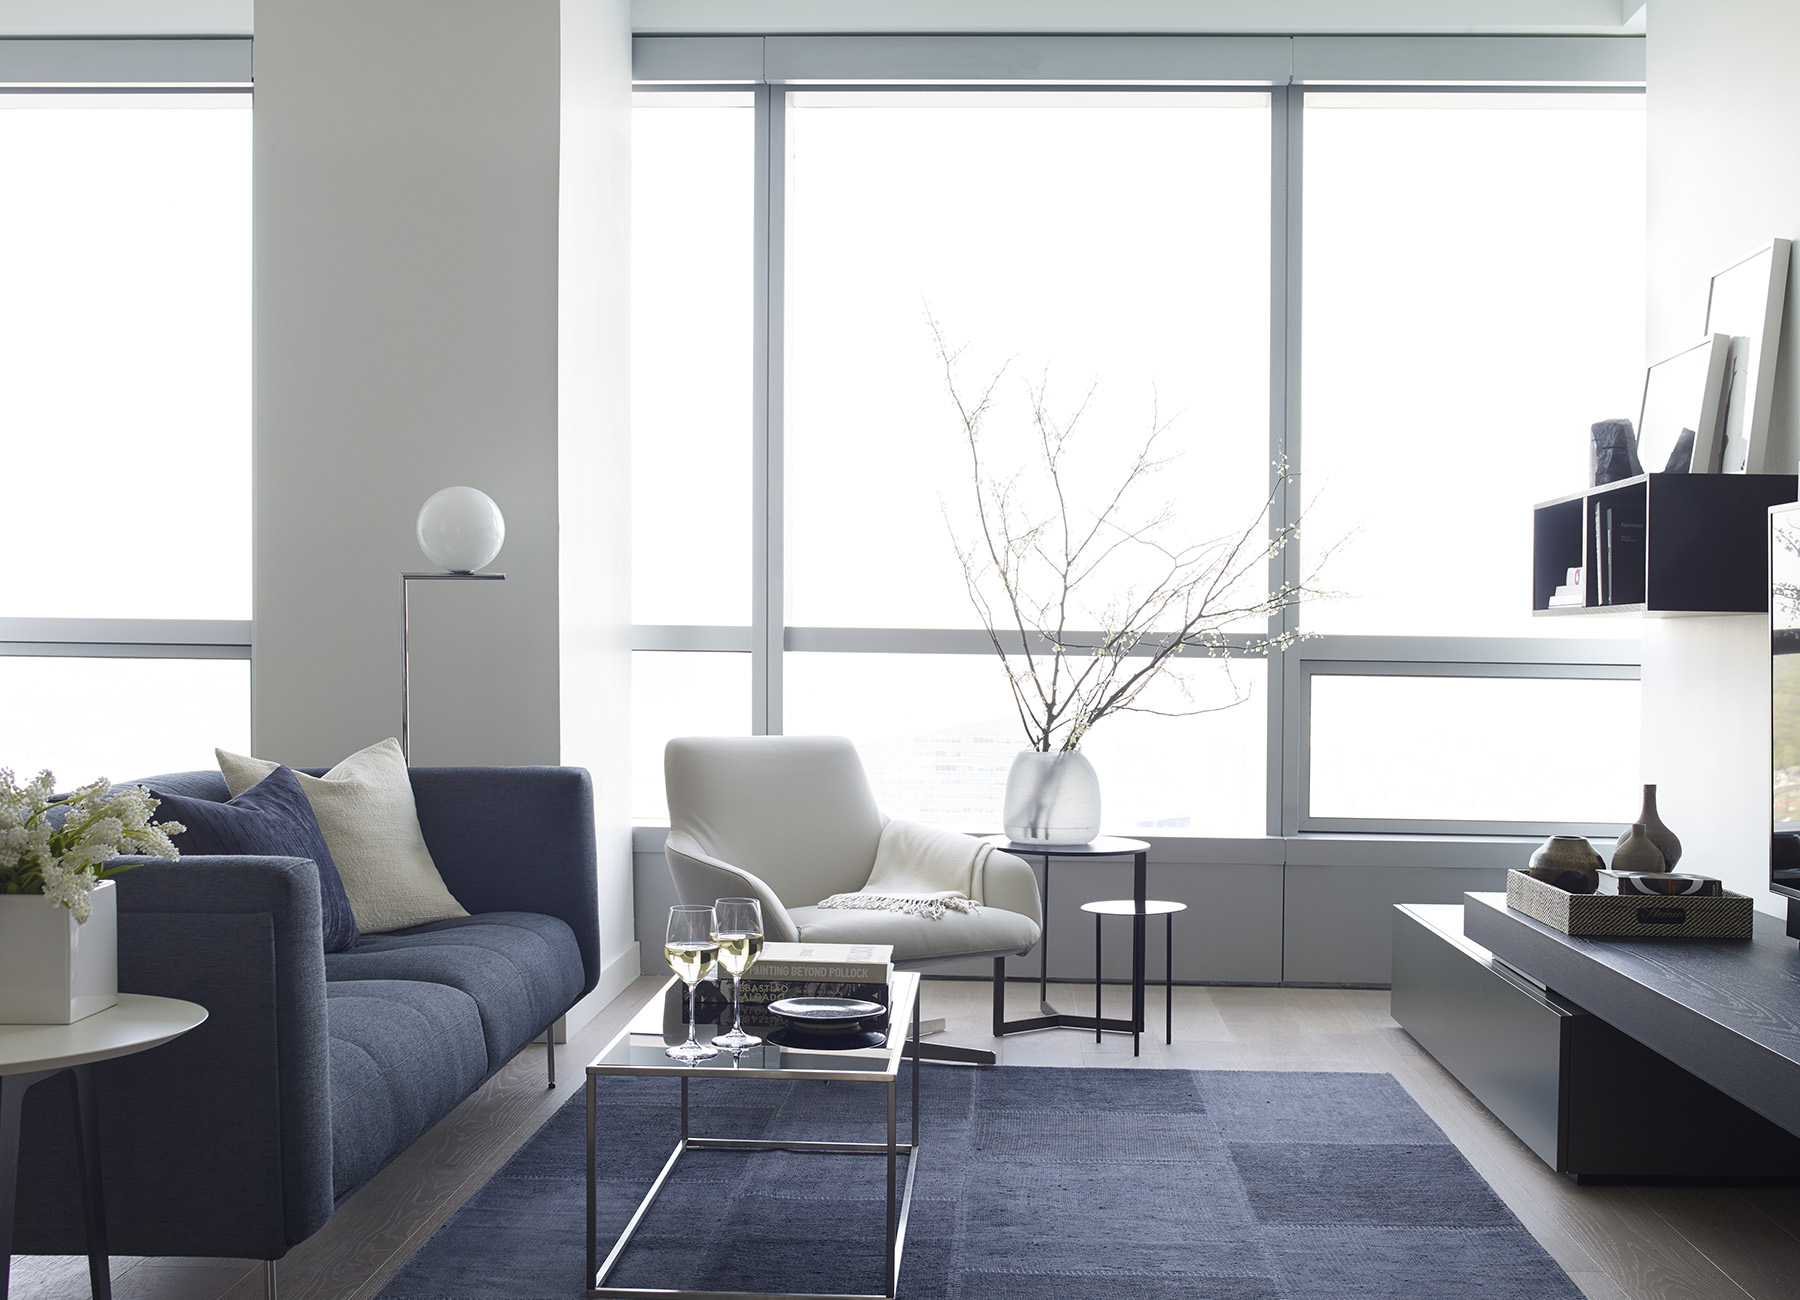 AKA University City living room with blue couch and Philadelphia city views through large windows 